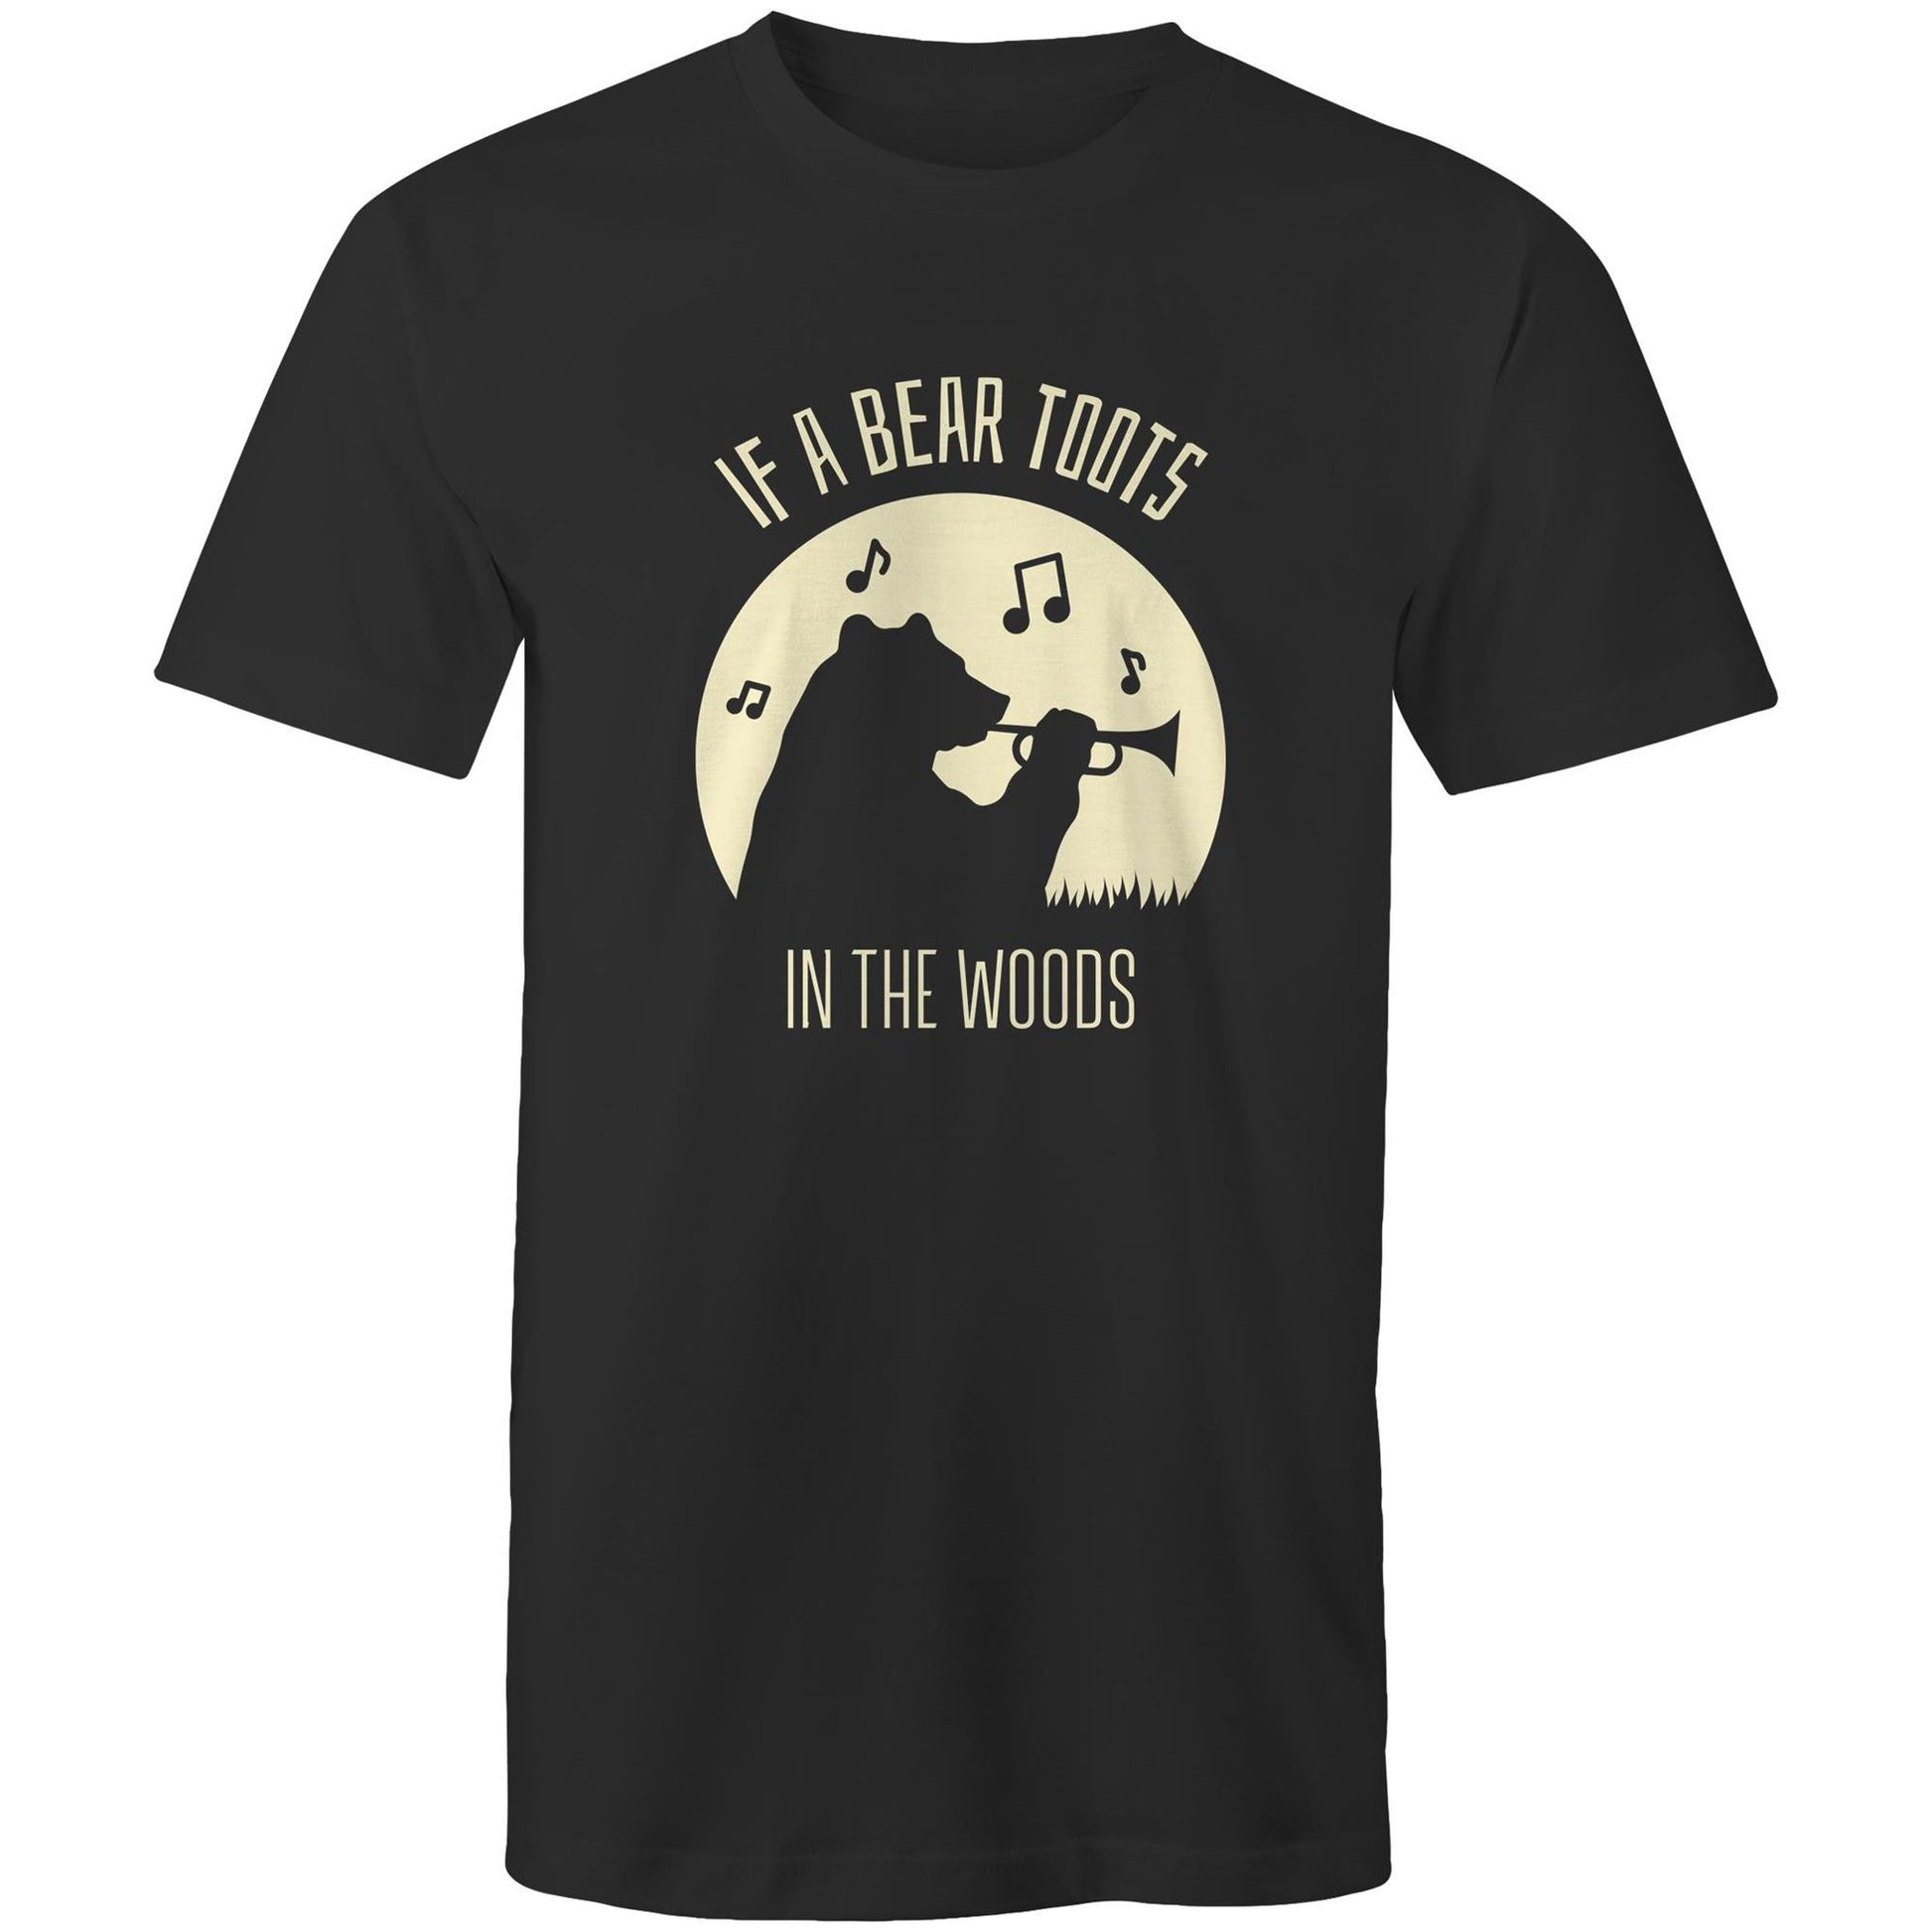 If A Bear Toots In The Woods, Trumpet Player - Mens T-Shirt Black Mens T-shirt animal Music